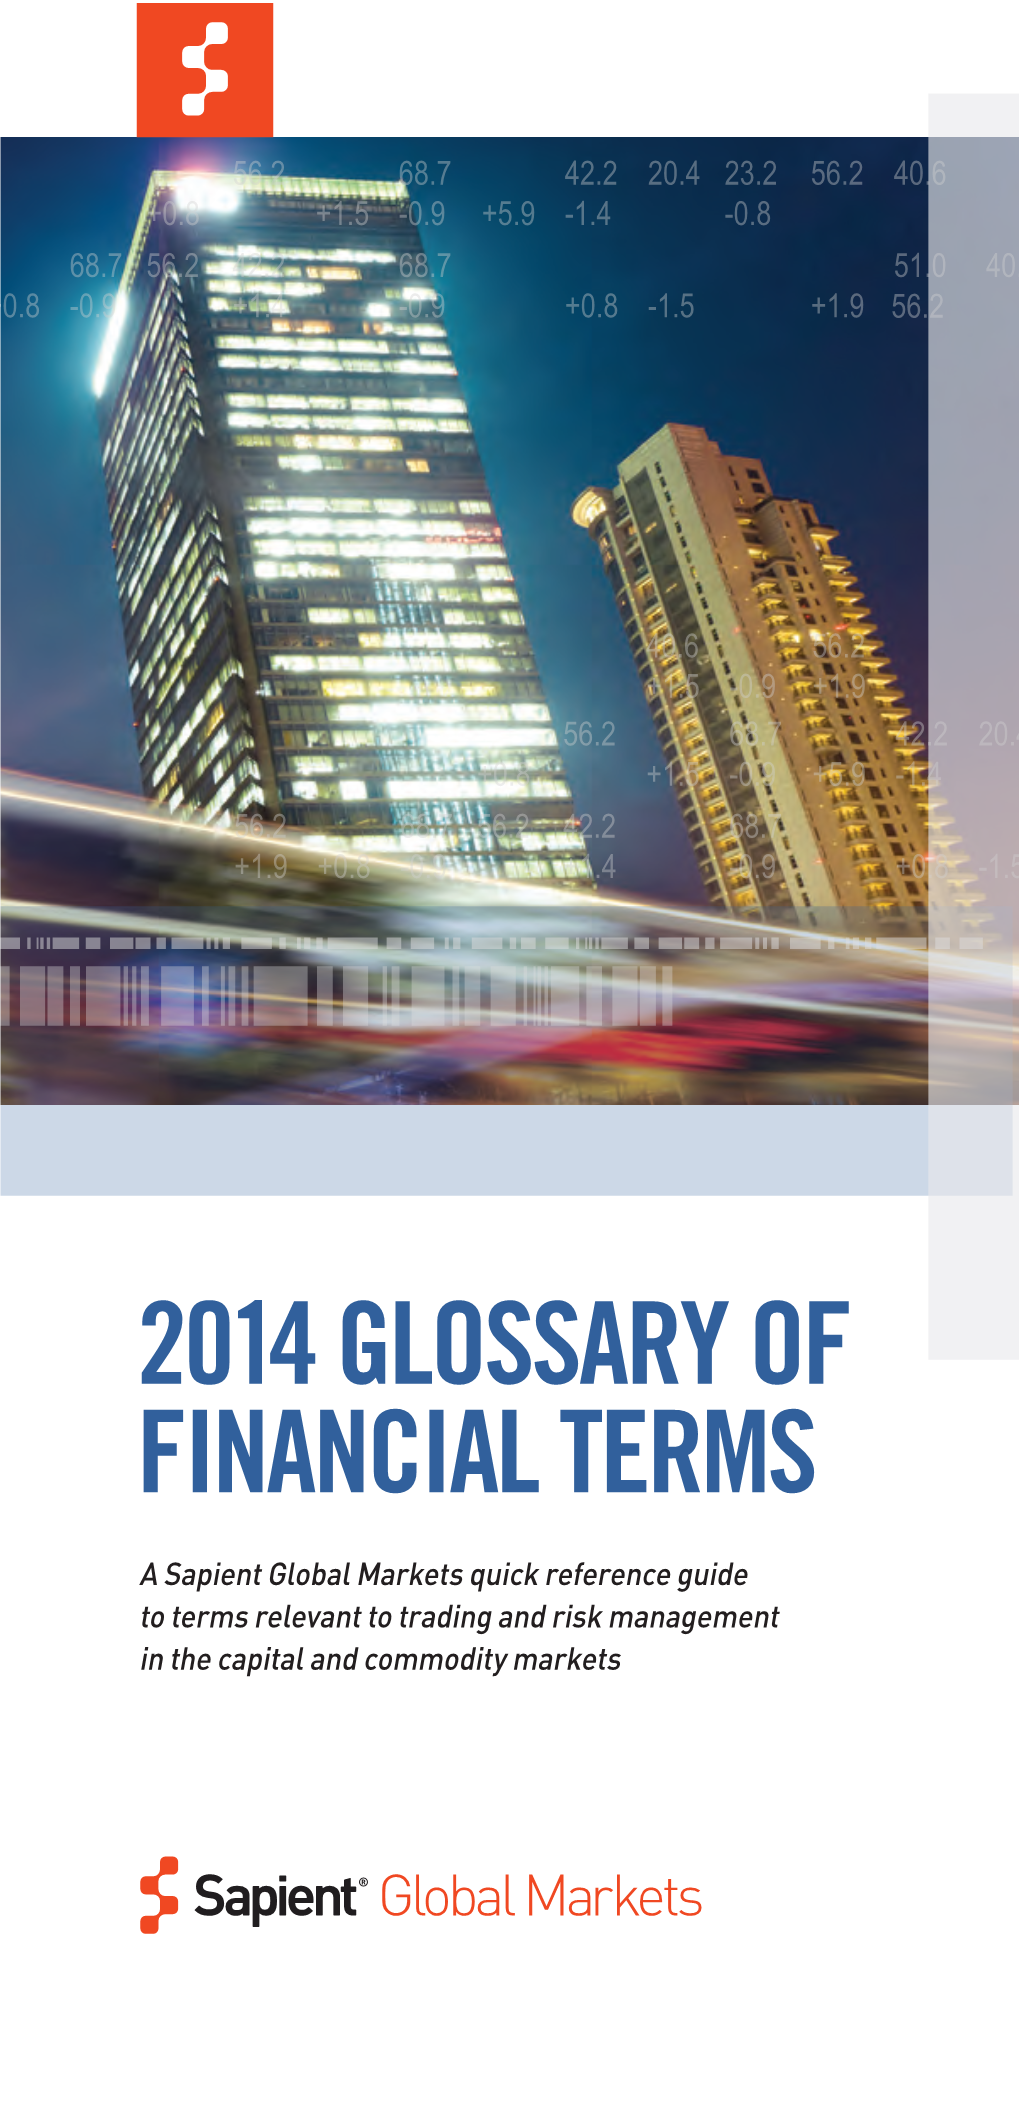 2014 Glossary of Financial Terms